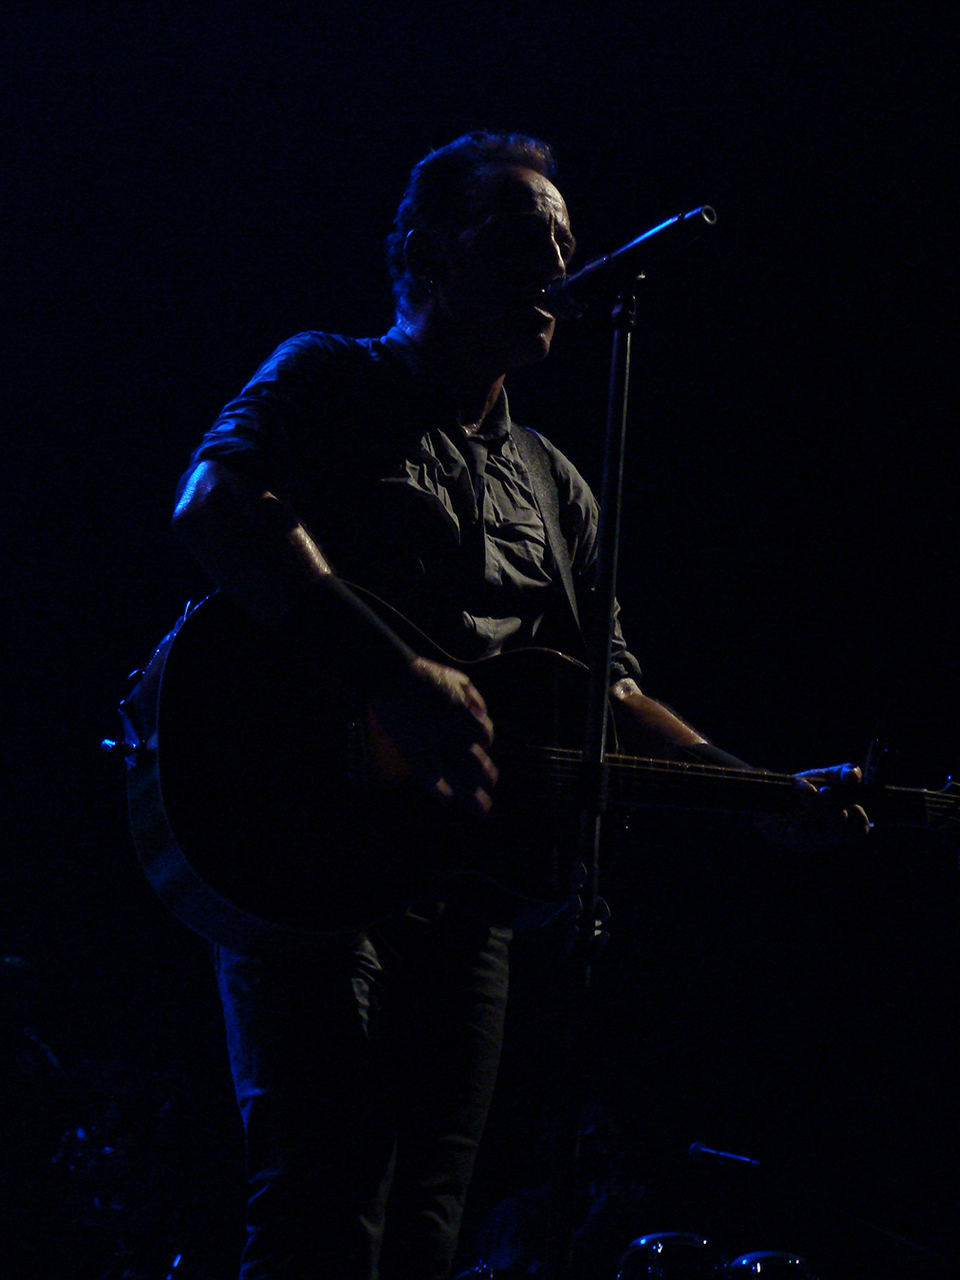 man playing guitar in front of microphone and dark stage